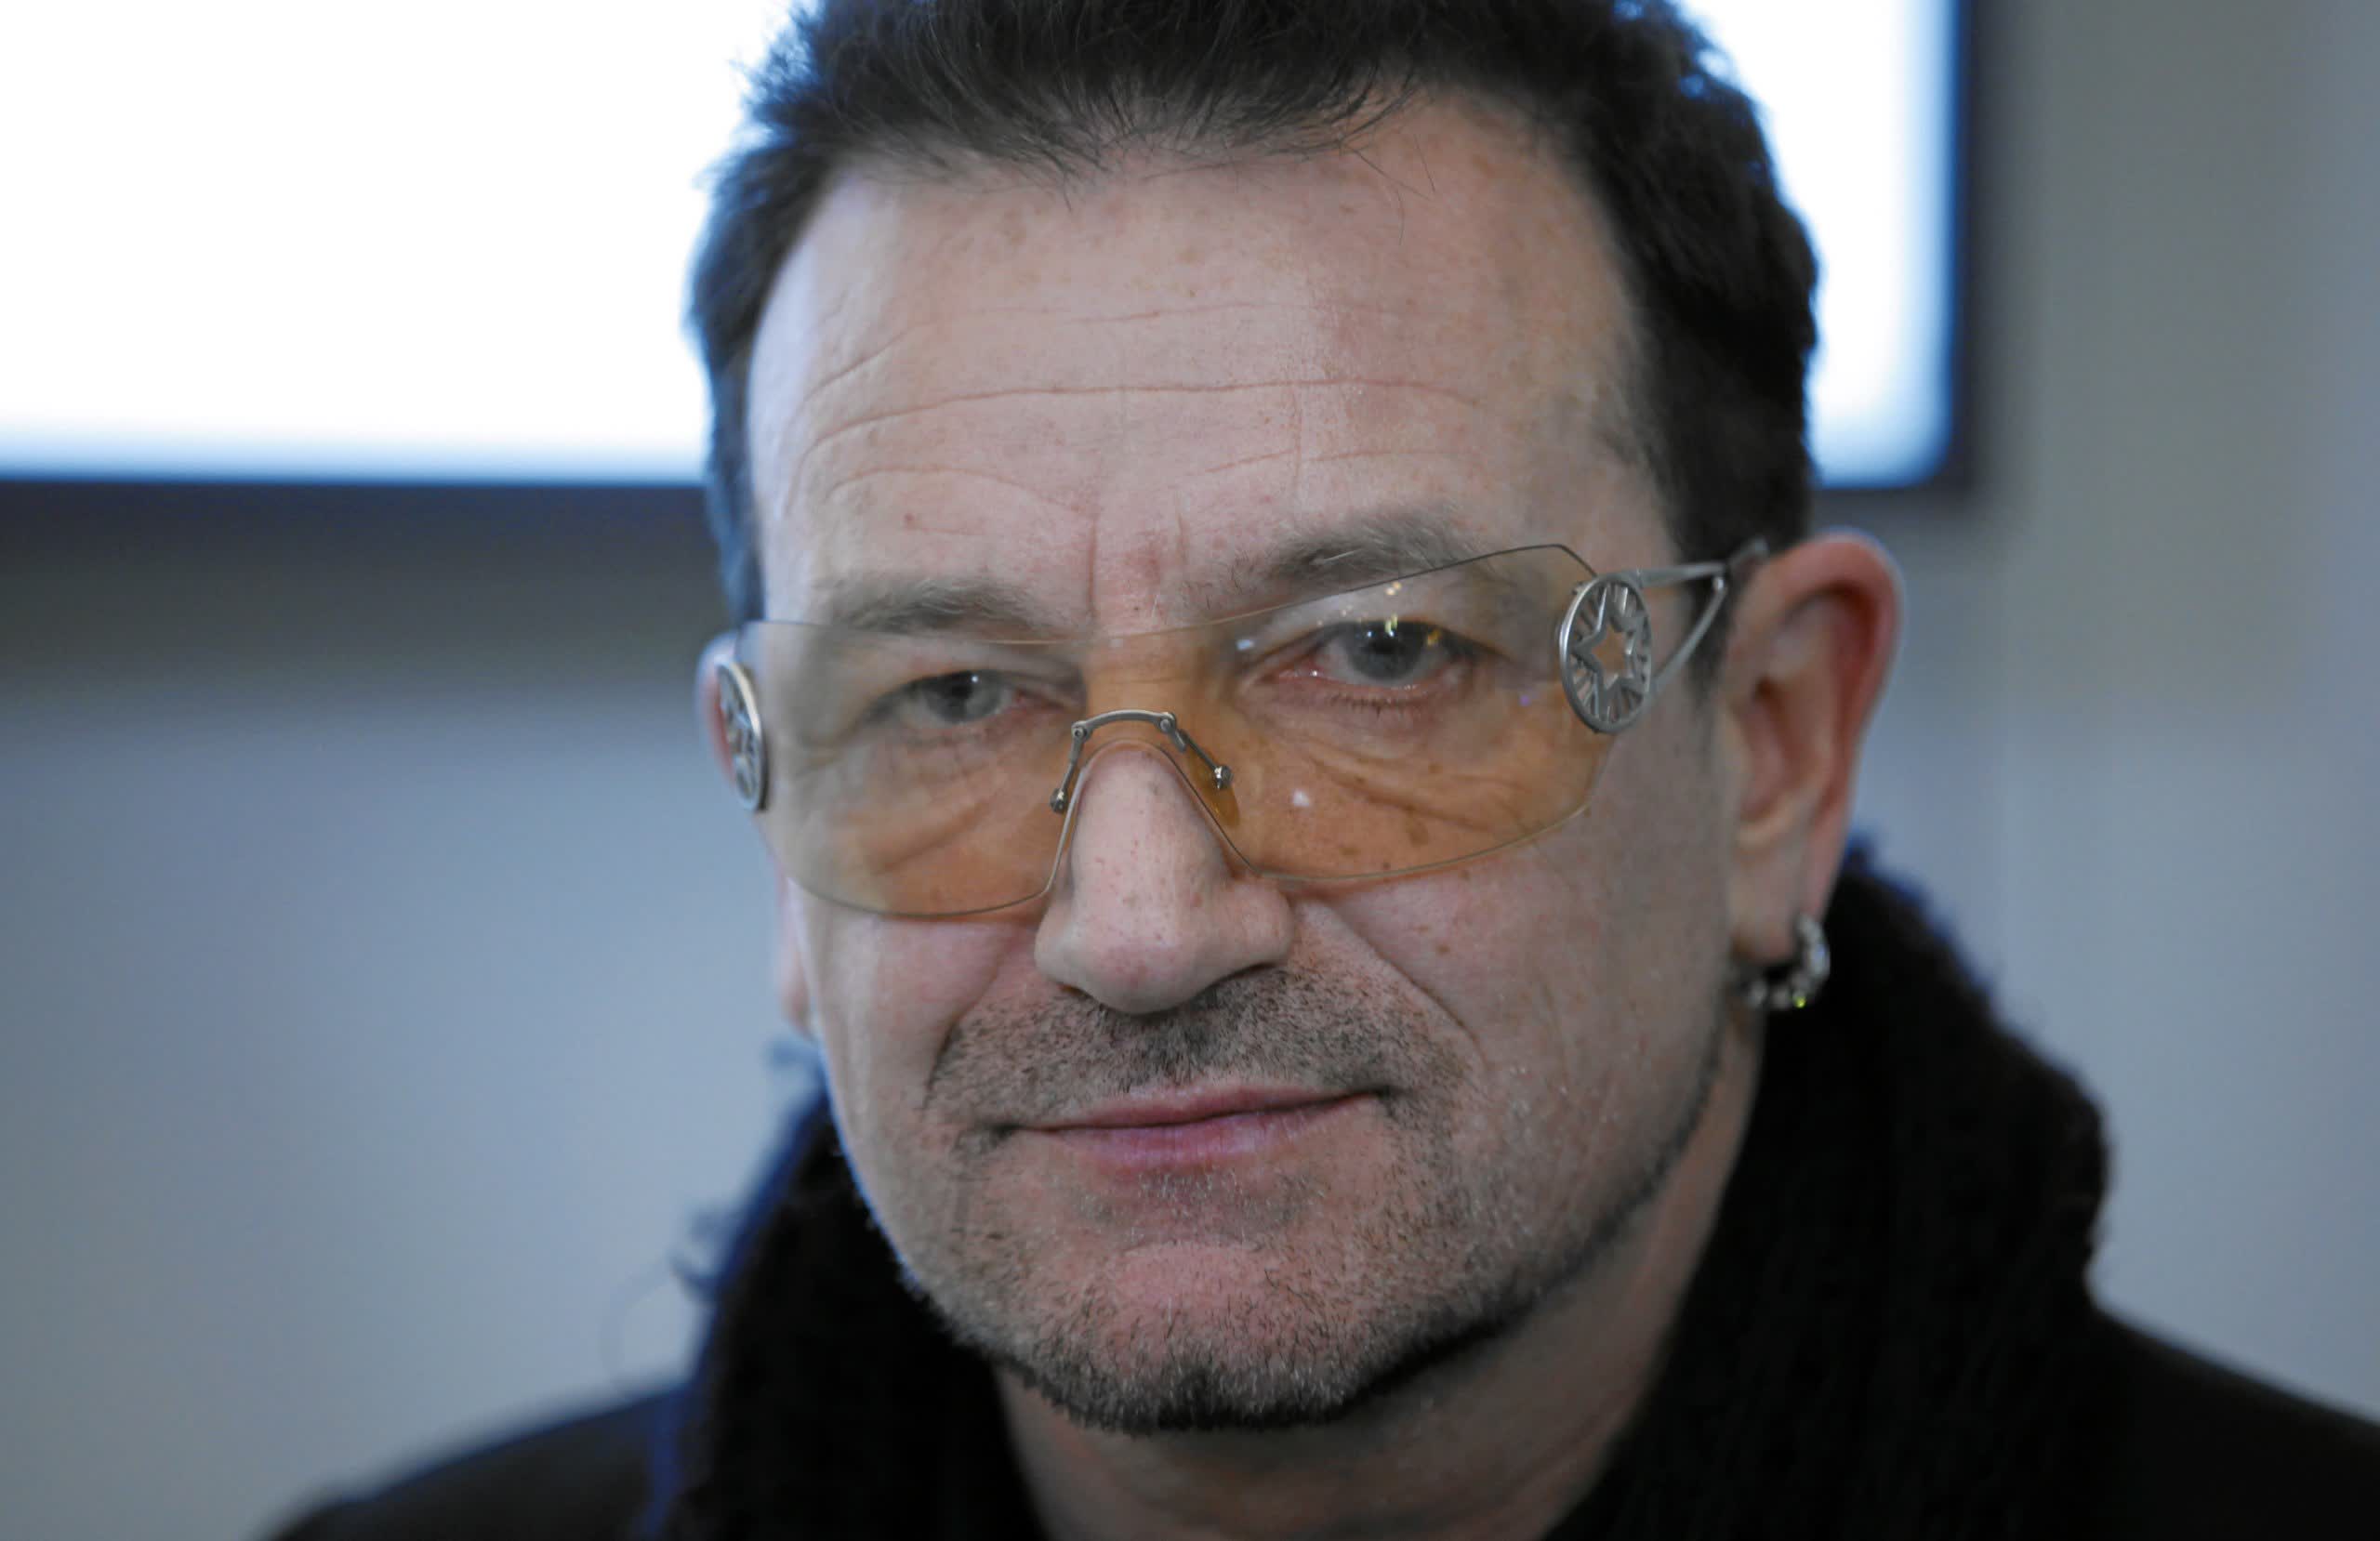 Bono says to blame him for the infamous free U2 album on iTunes